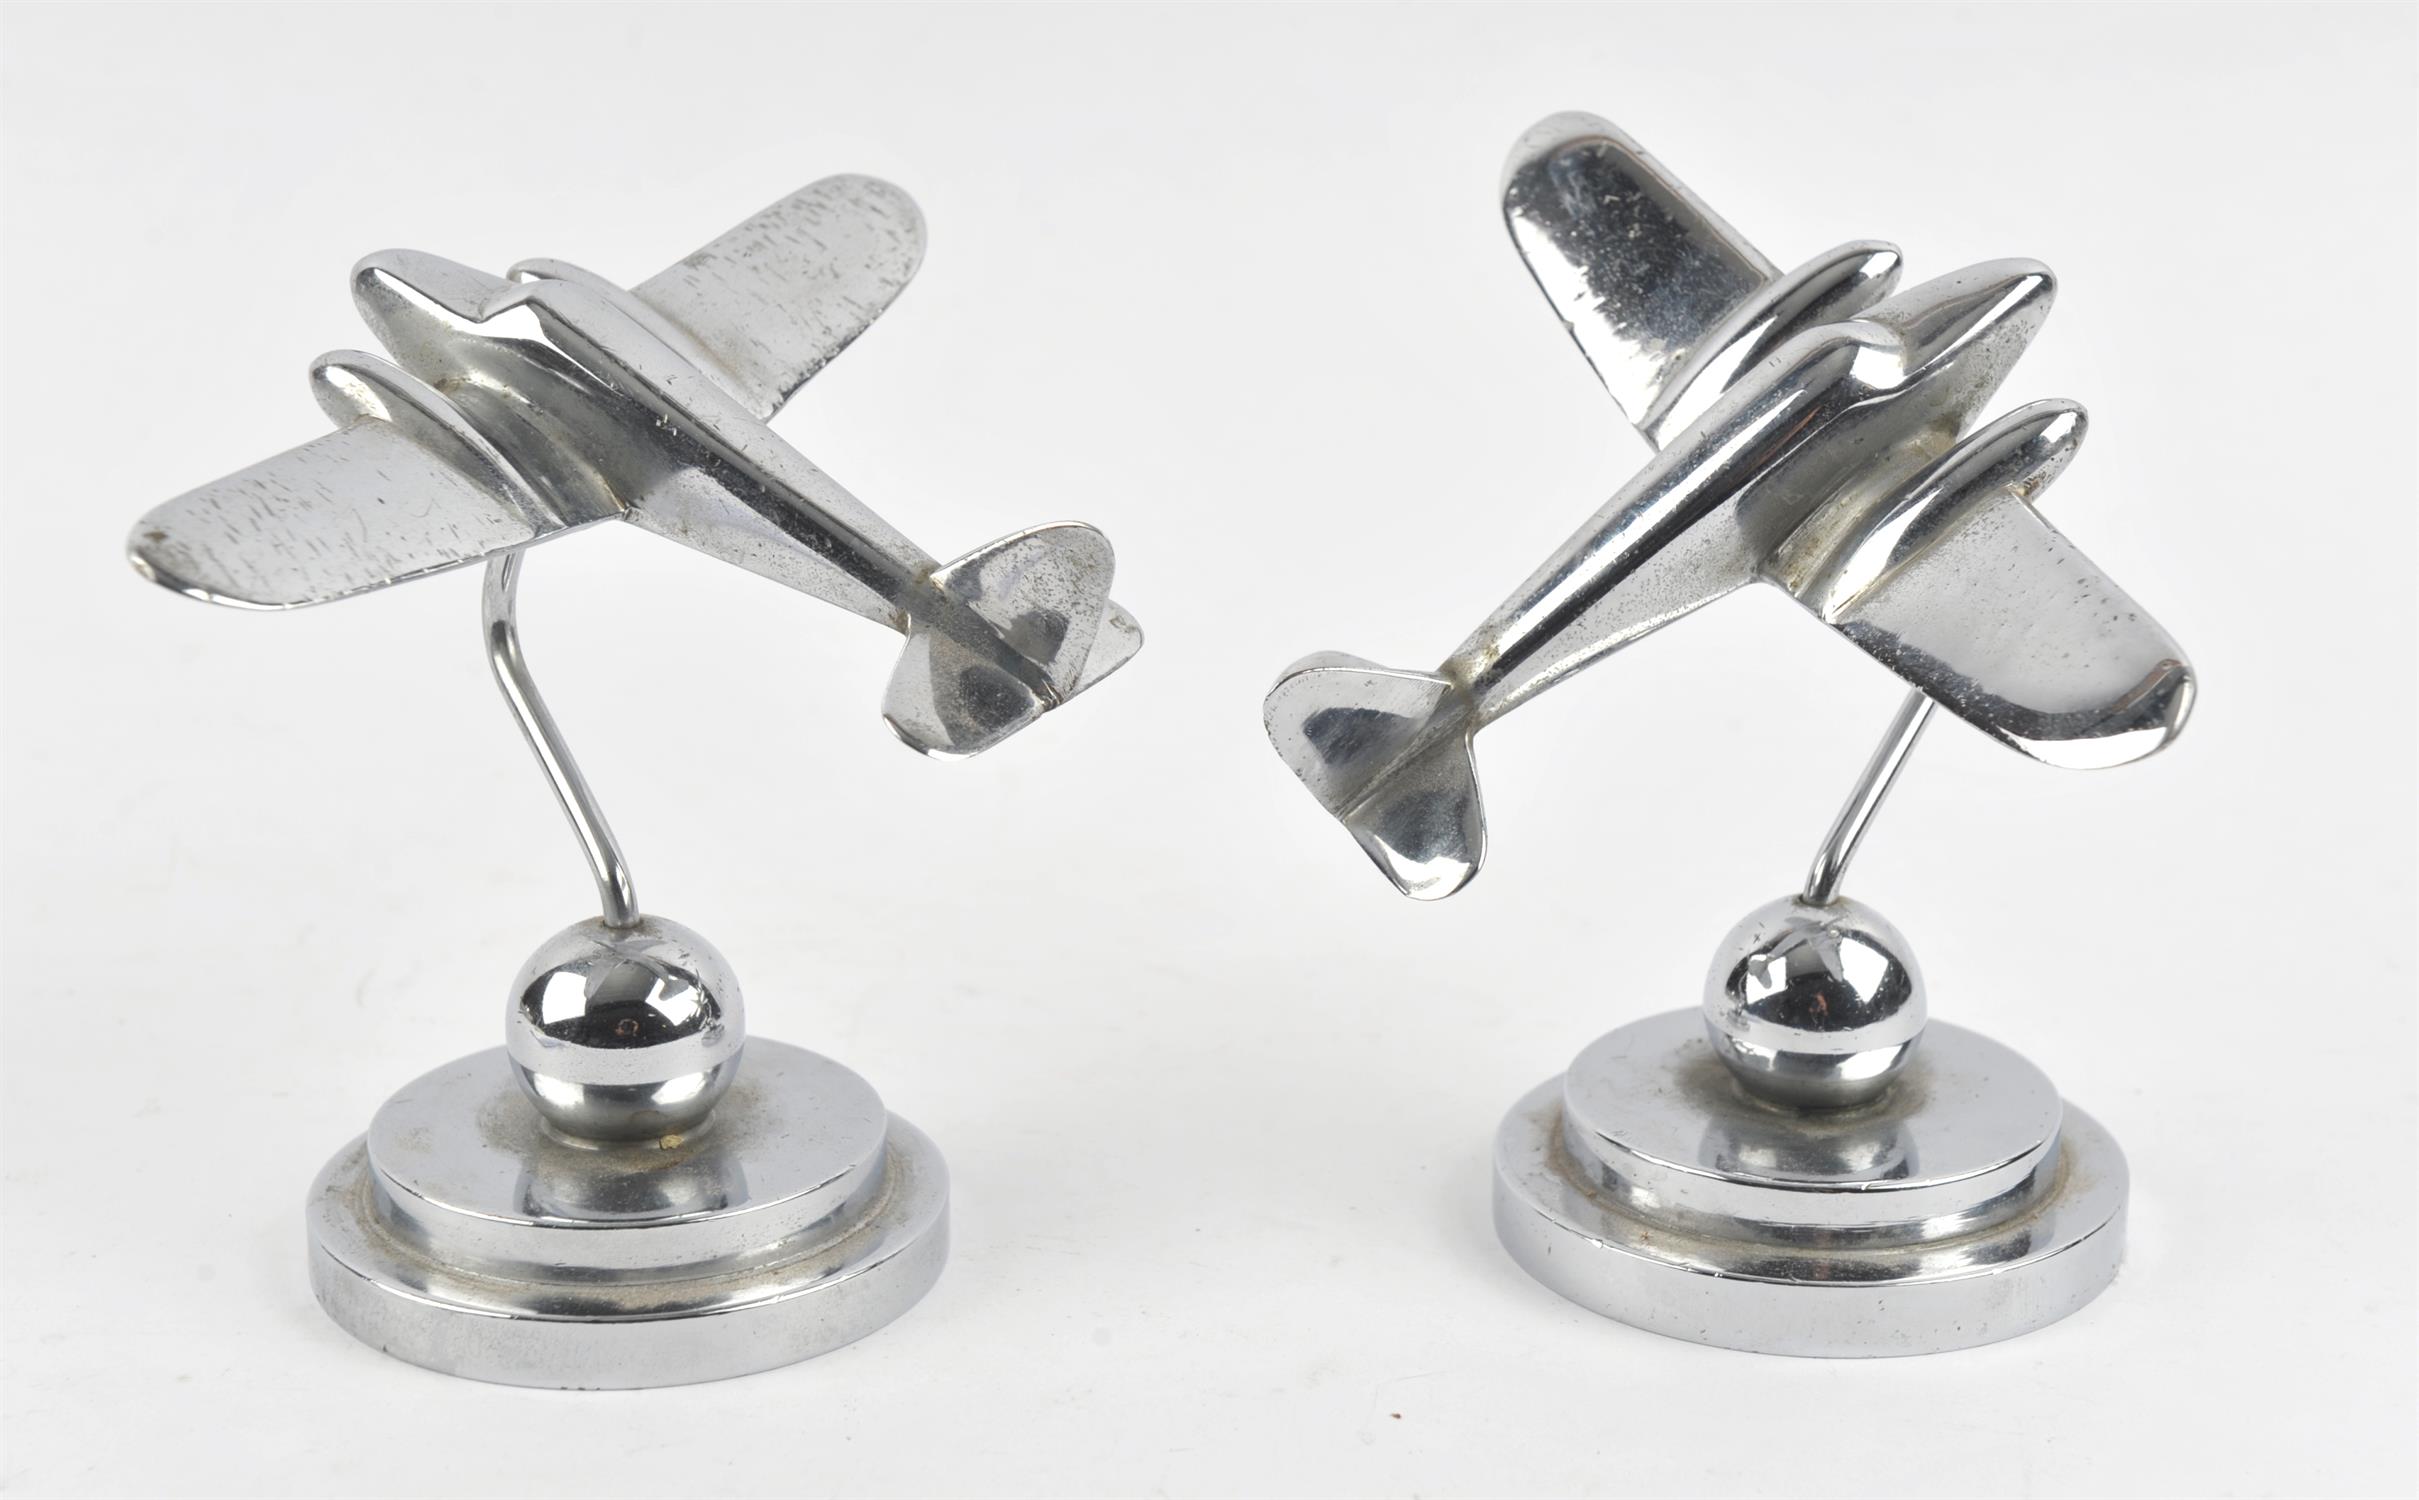 Pair of Art Deco aluminium desk ornaments cast as twin engine aircraft, on stepped base,